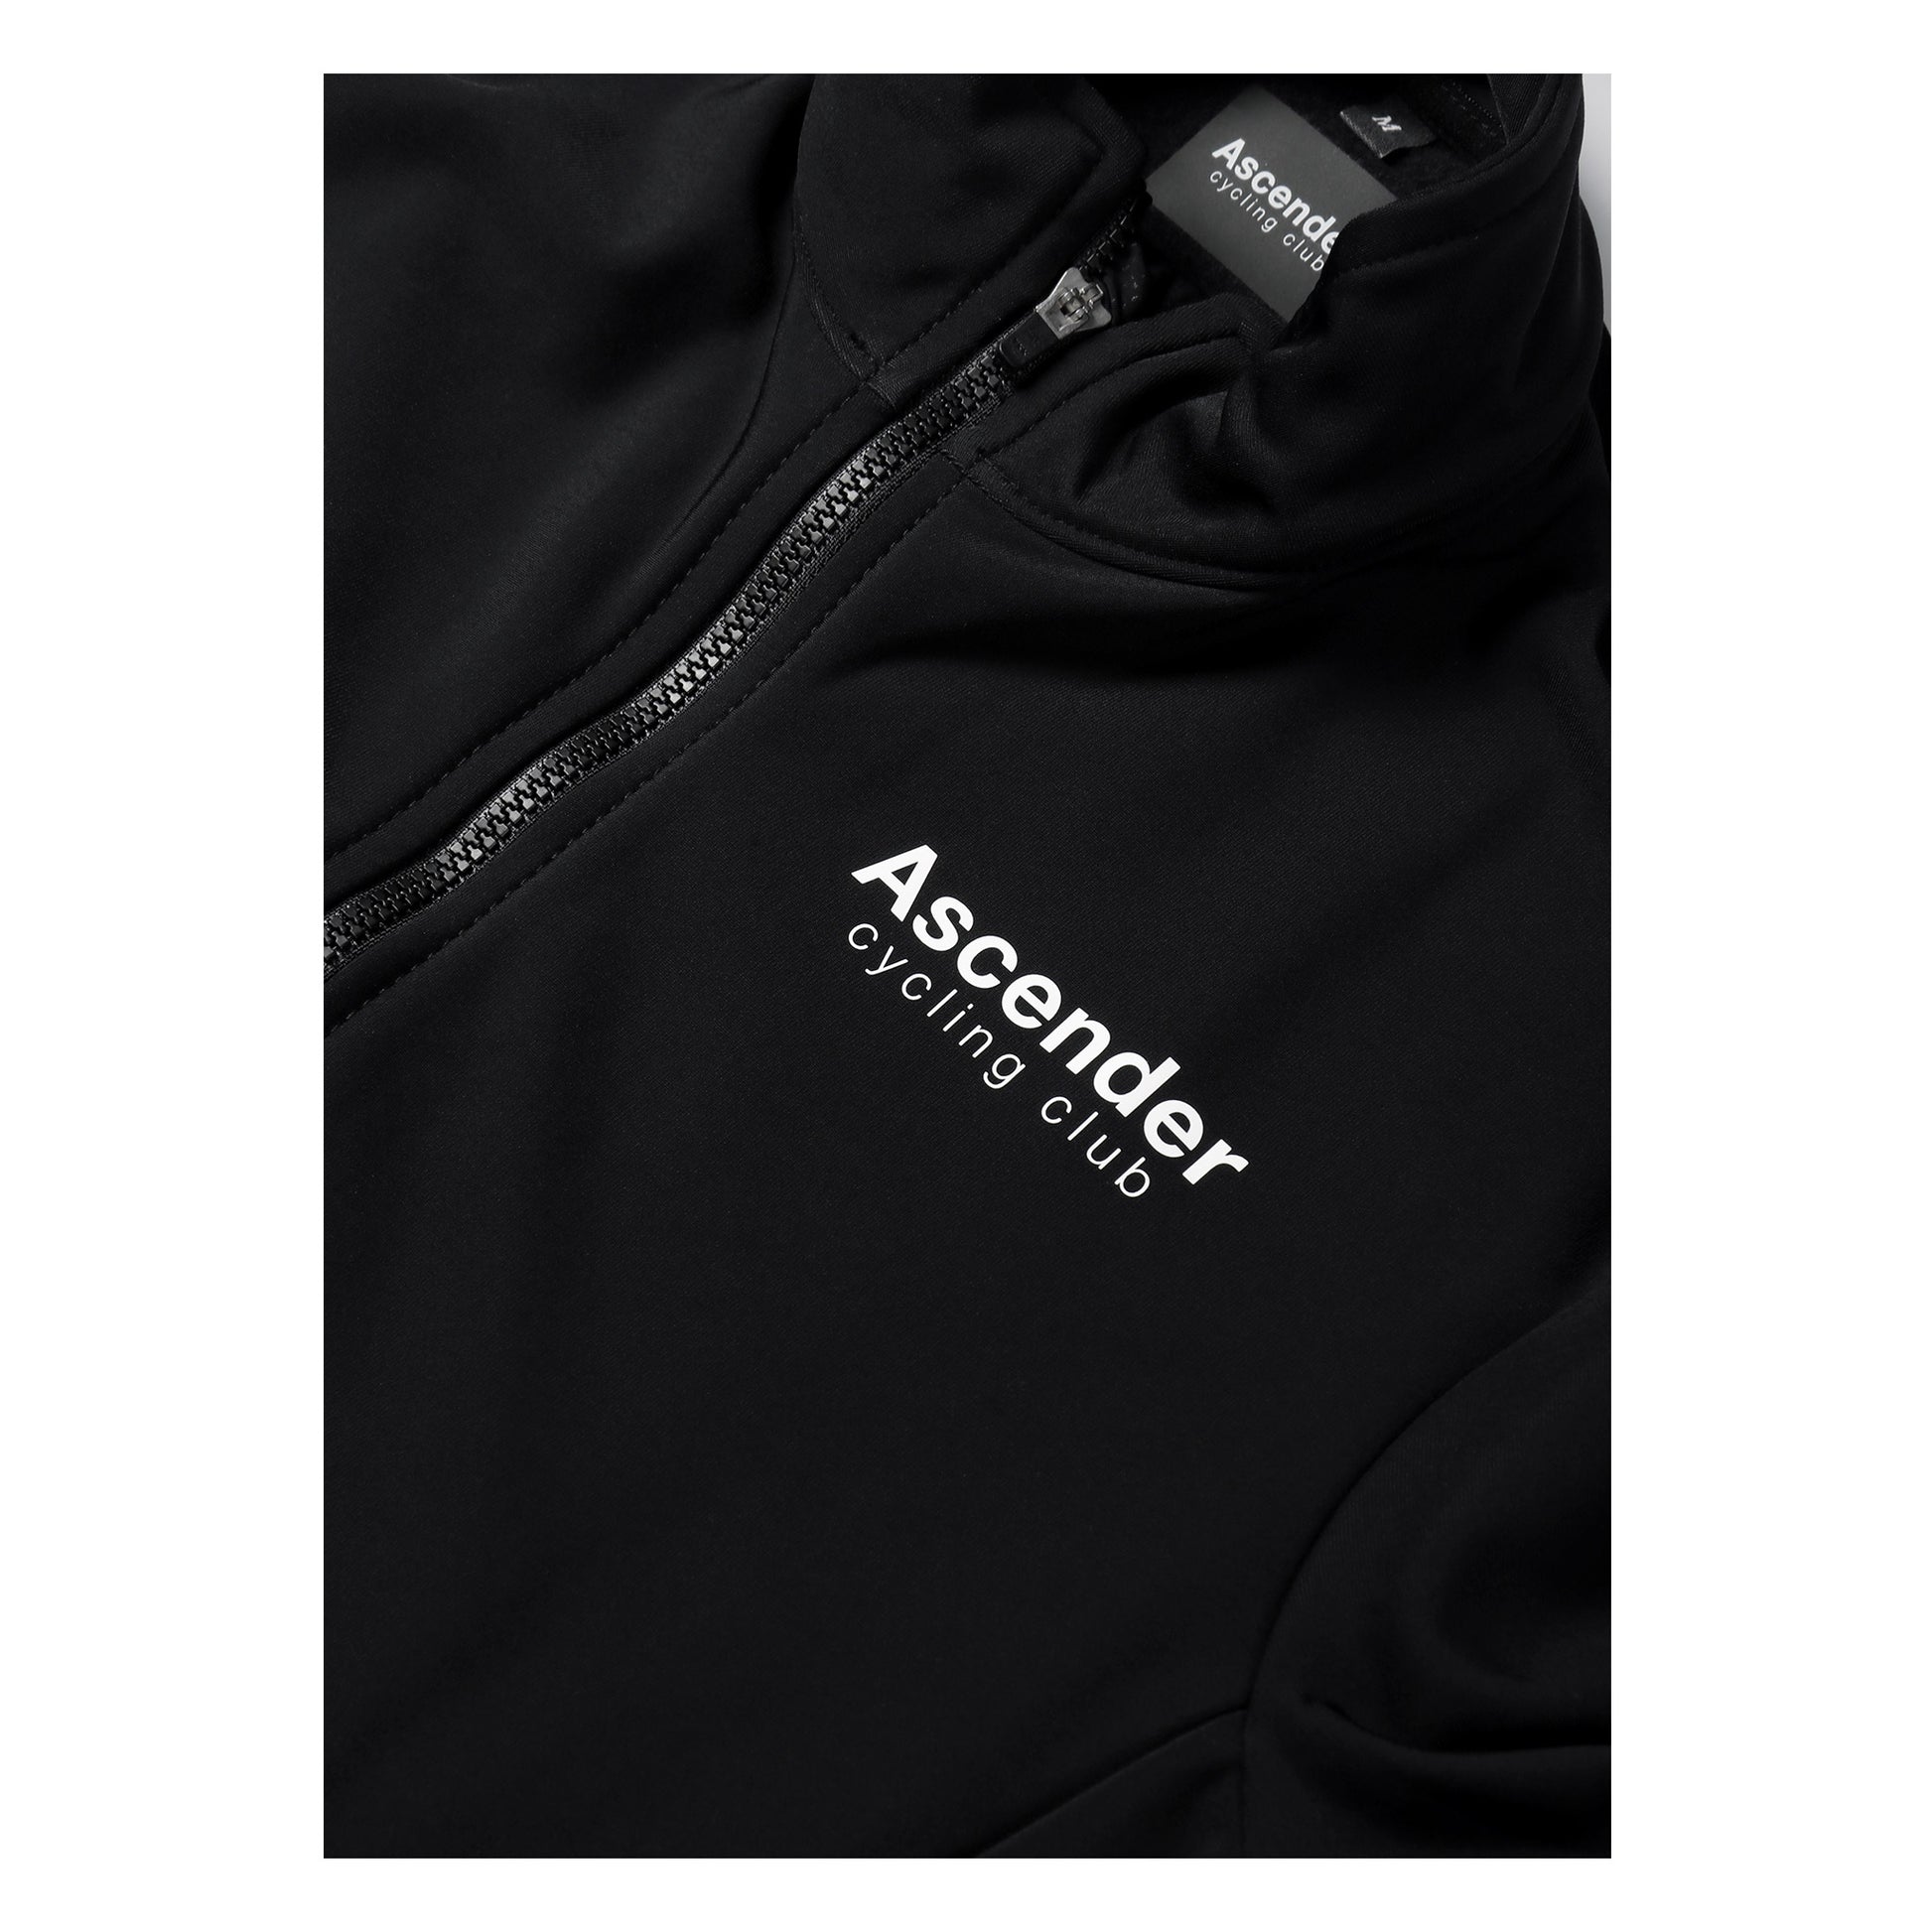 Milano Thermal Long Sleeve Jersey Black from Ascender Cycling Club Zürich Switzerland Frontside Logo  View